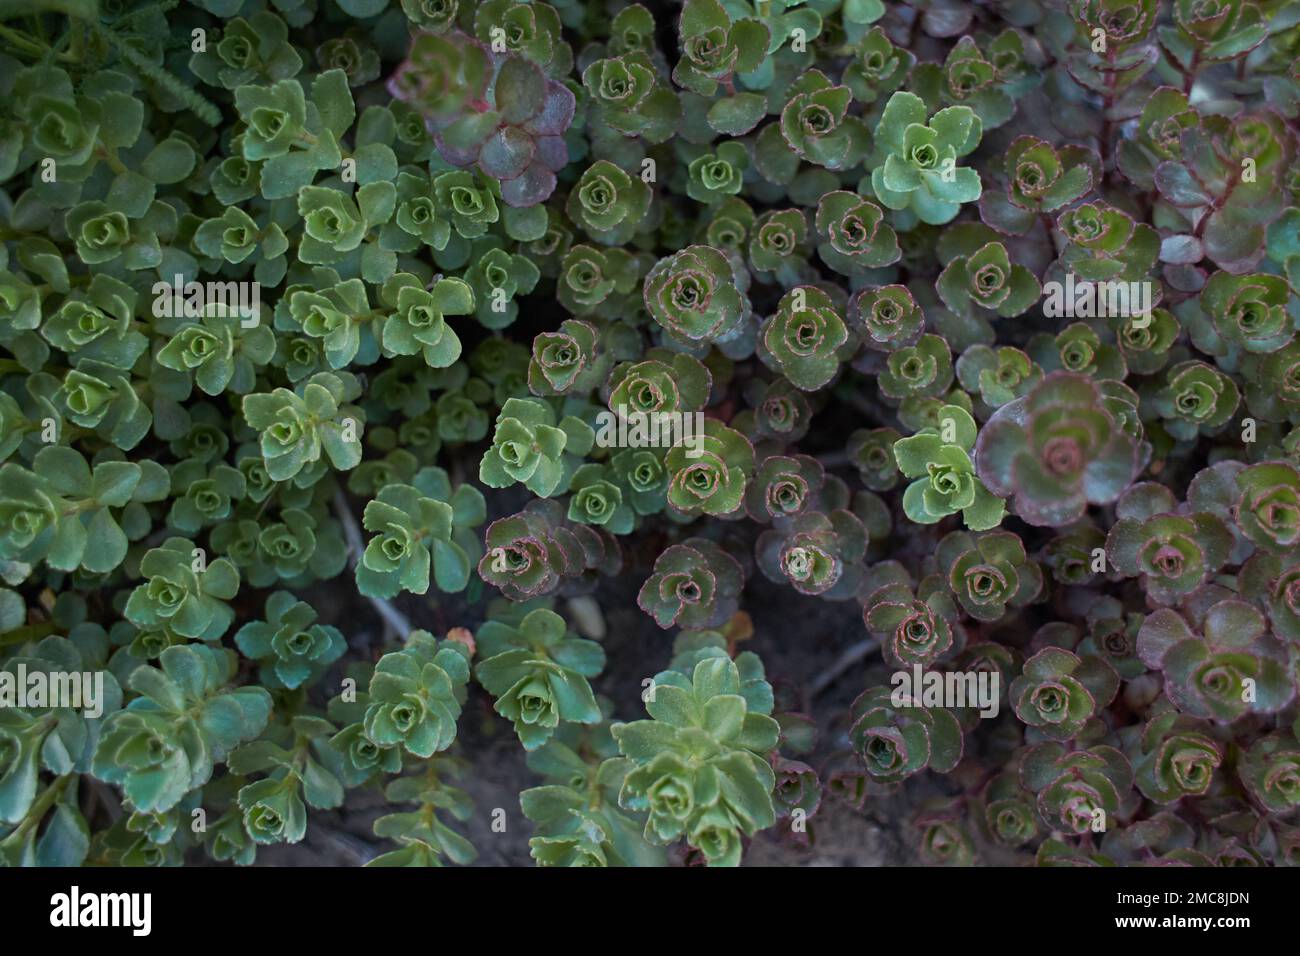 Green plant of ‘John Creech’ stonecrop, Sedum Spurium Summer Glory Green Roof Plants in the garden. Summer and spring time. Stock Photo